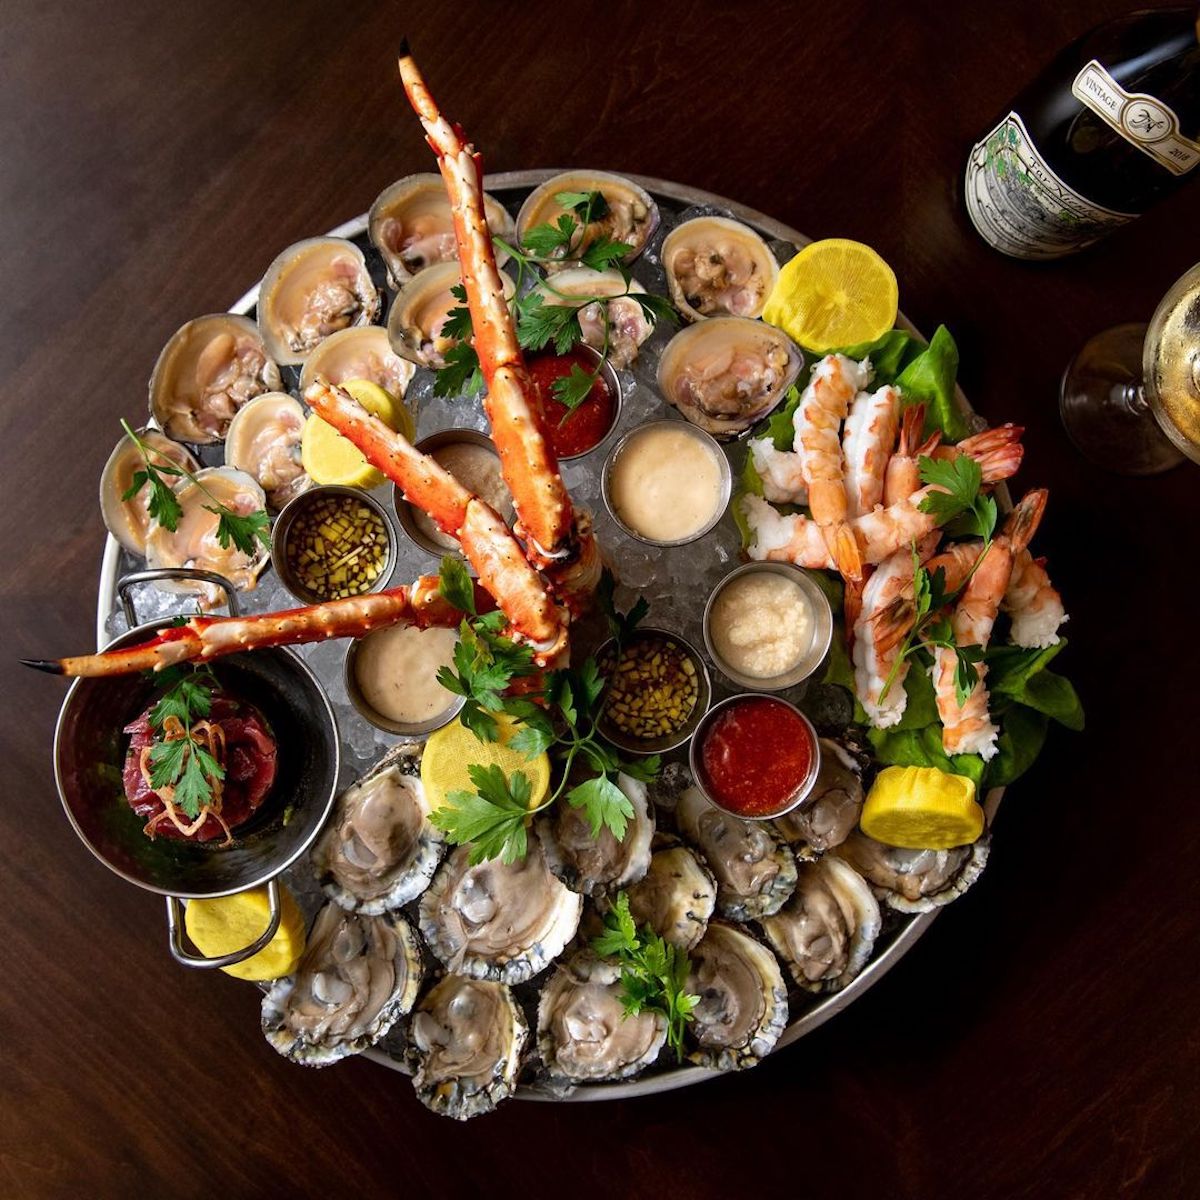 C&S Seafood and Oyster Bar, Vinings is Relocating to Galleria On the Park